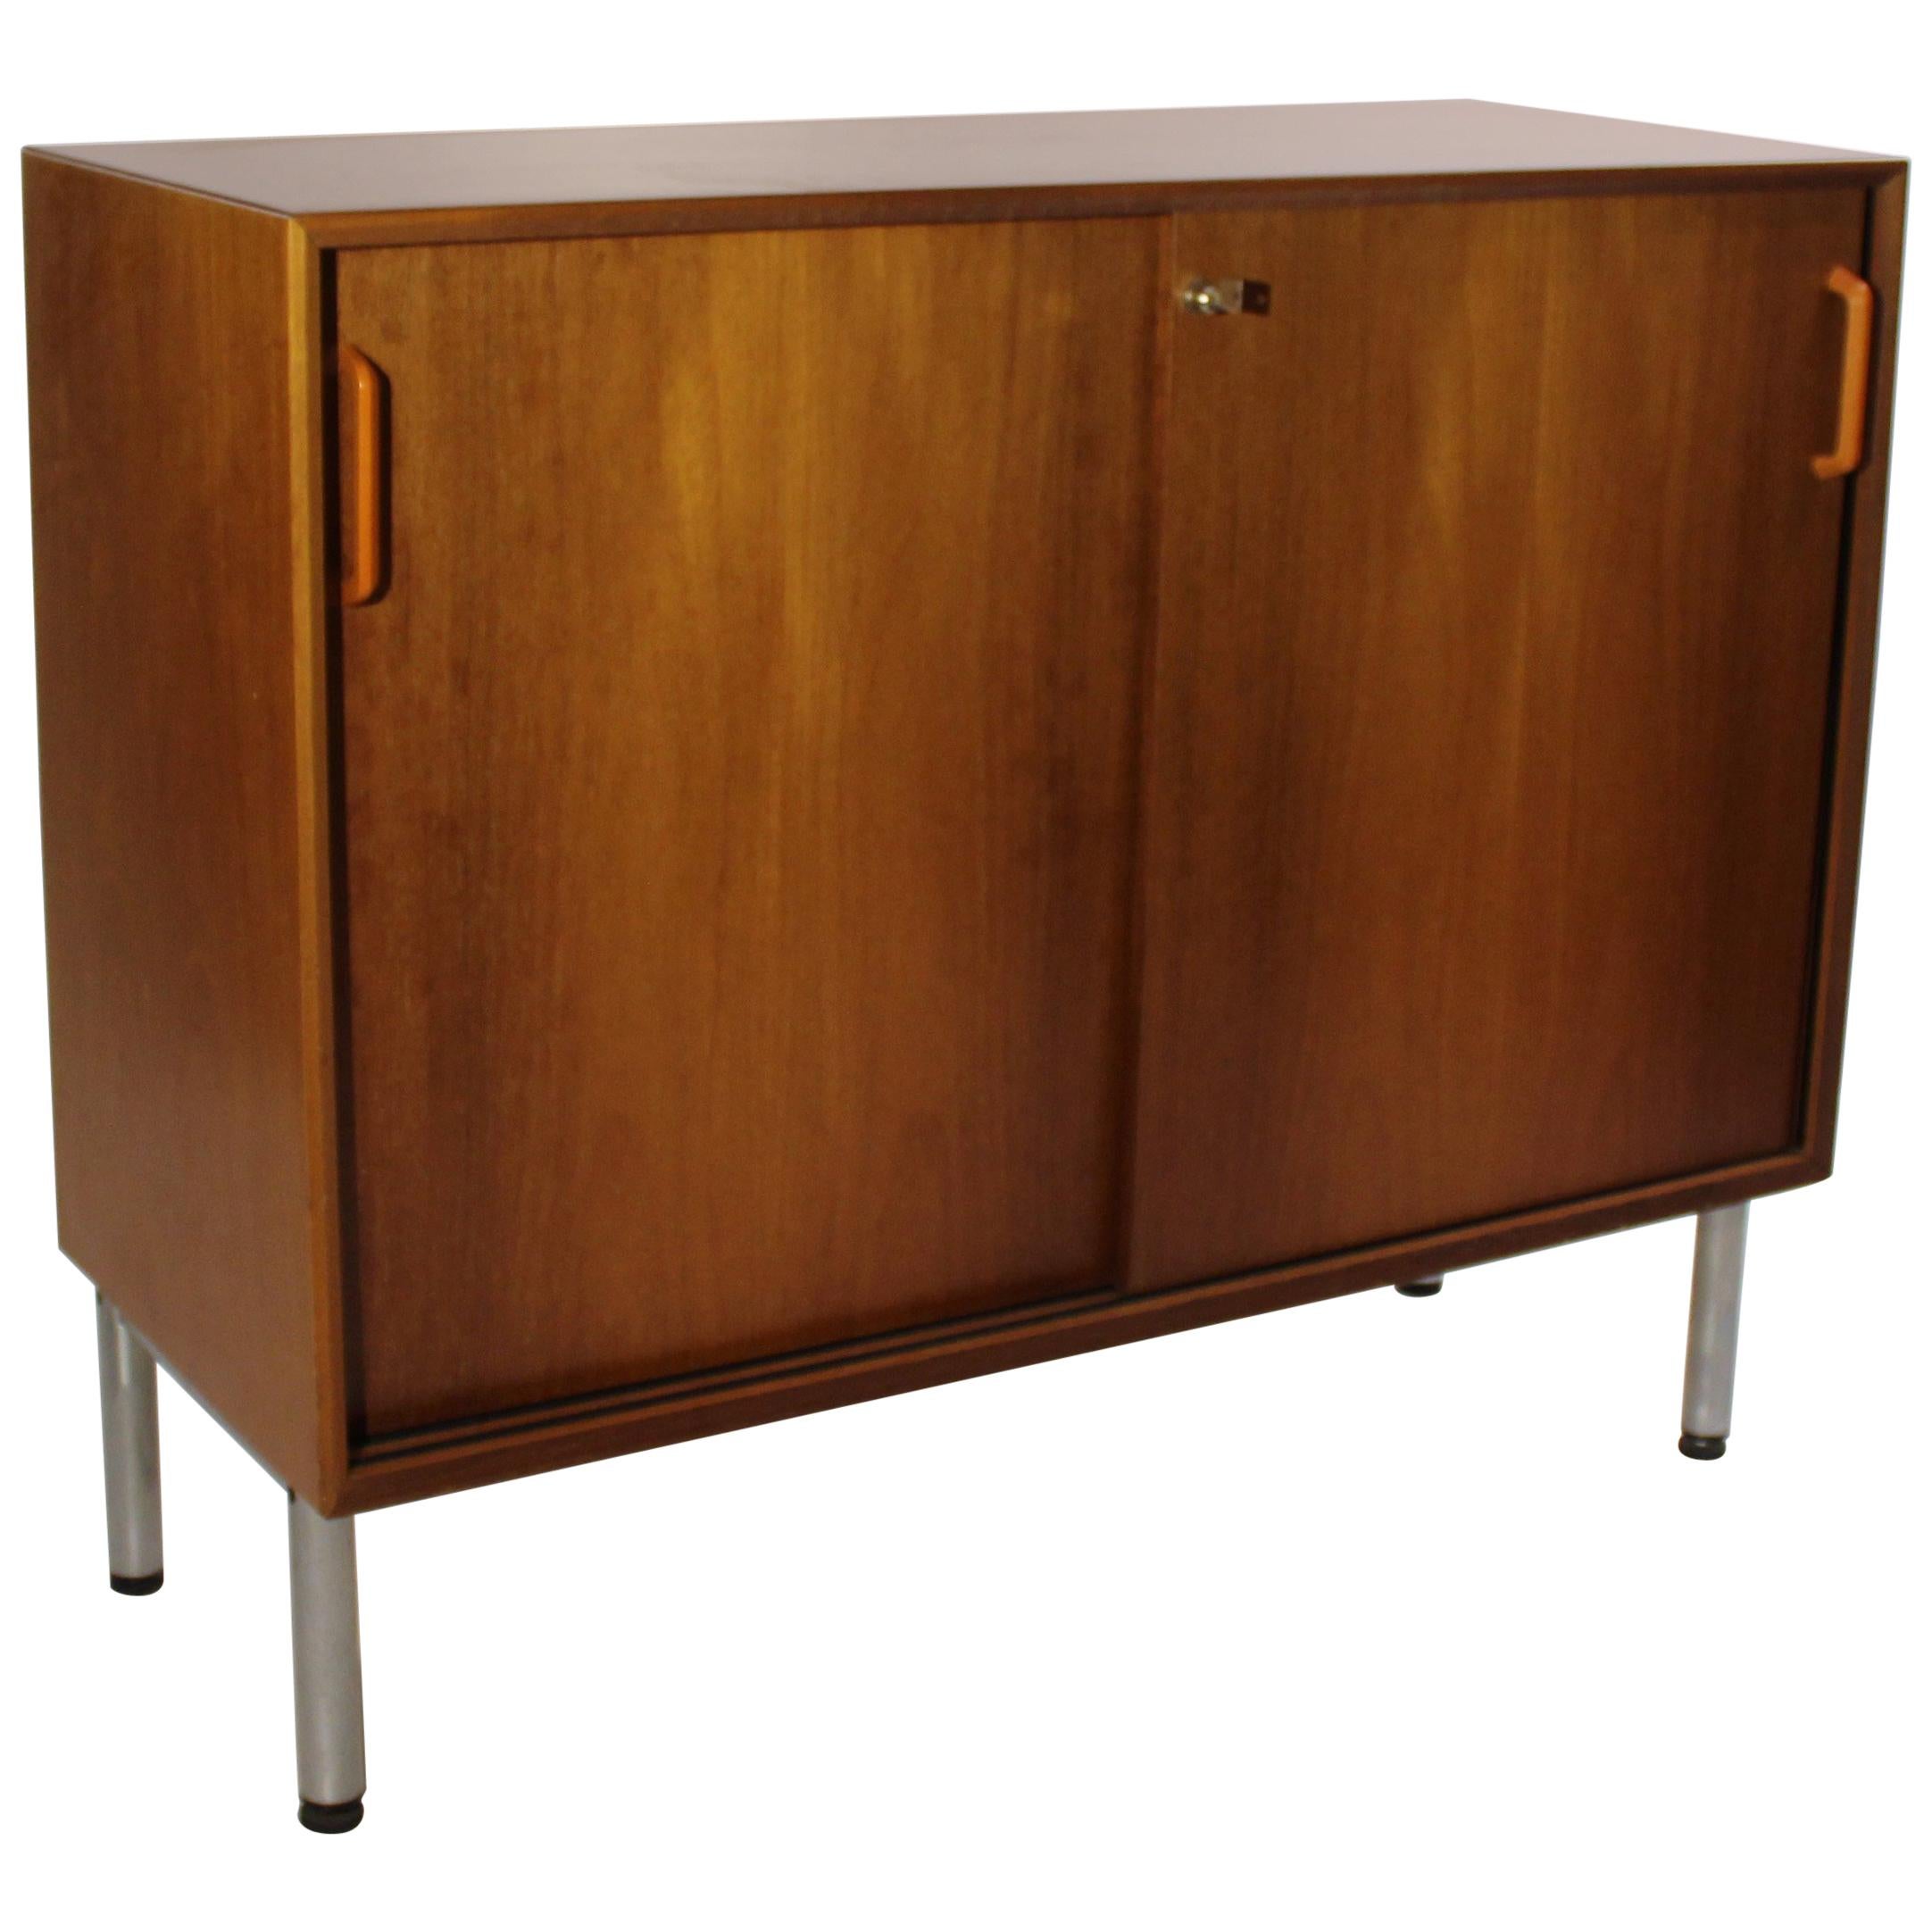 Cabinet with Sliding Doors in Light Mahogany of Danish Design from the 1960s For Sale